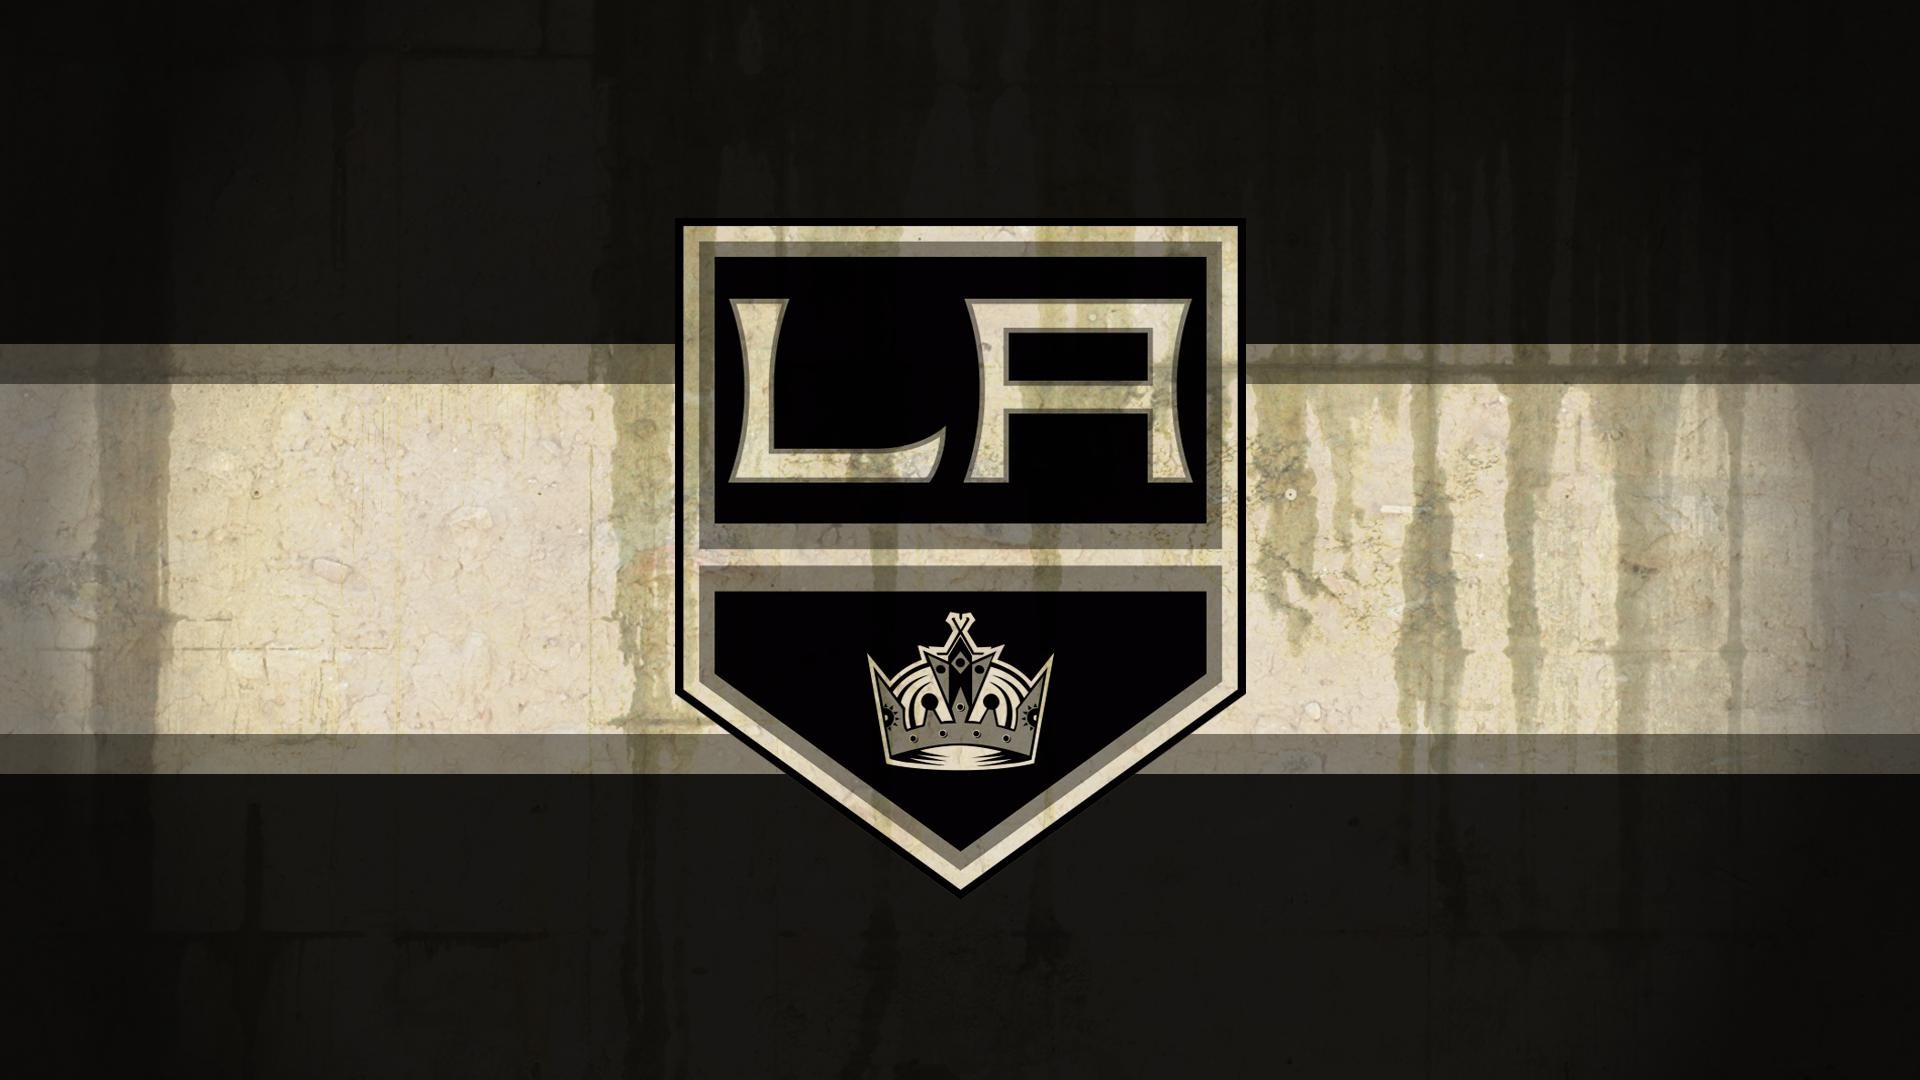 1920x1080 Los Angeles Kings Backgrounds Free Download | Page 2 of 3 | wallpaper.wiki